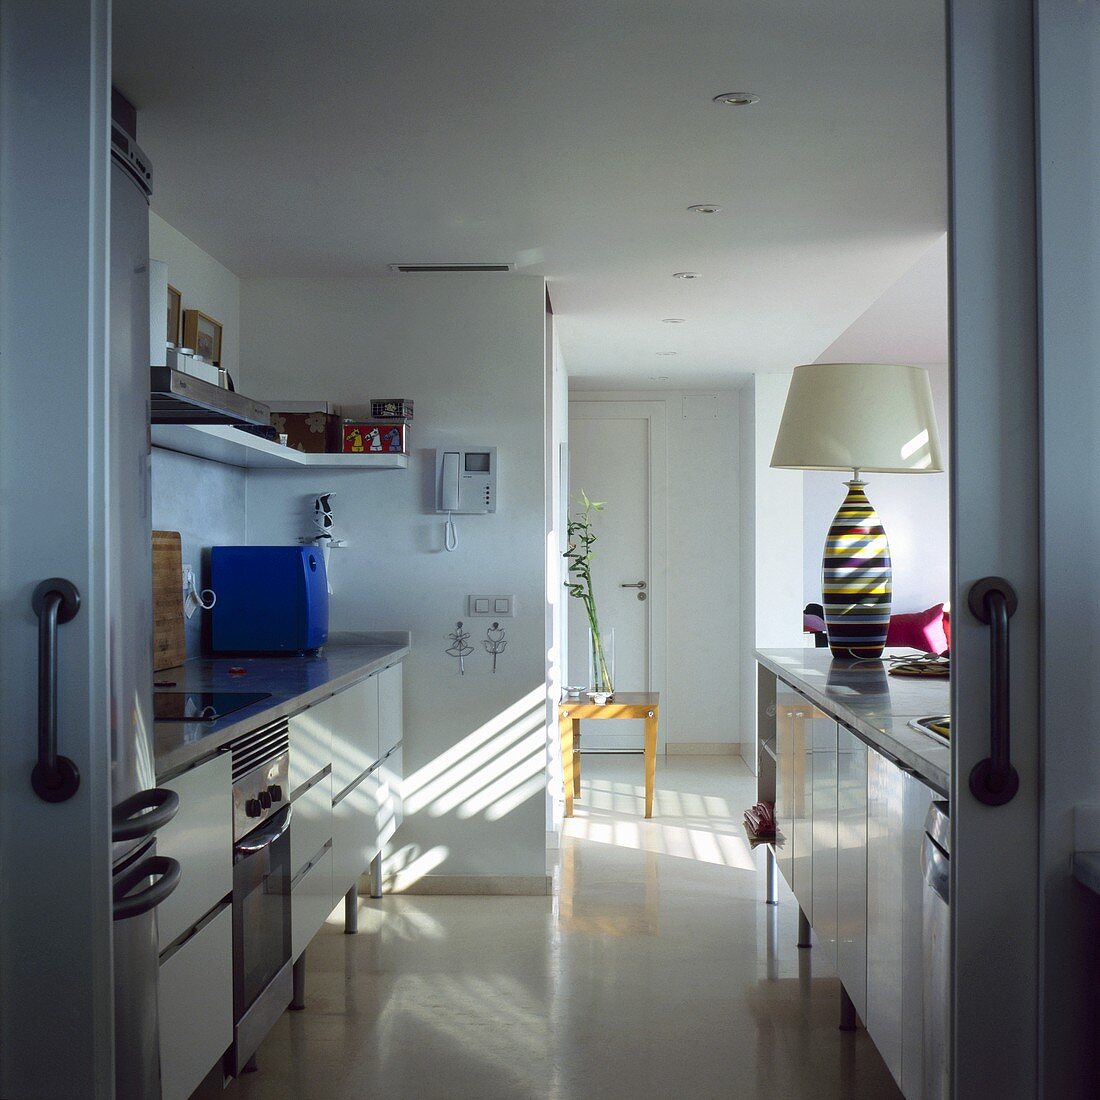 An open-plan kitchen with white cupboards